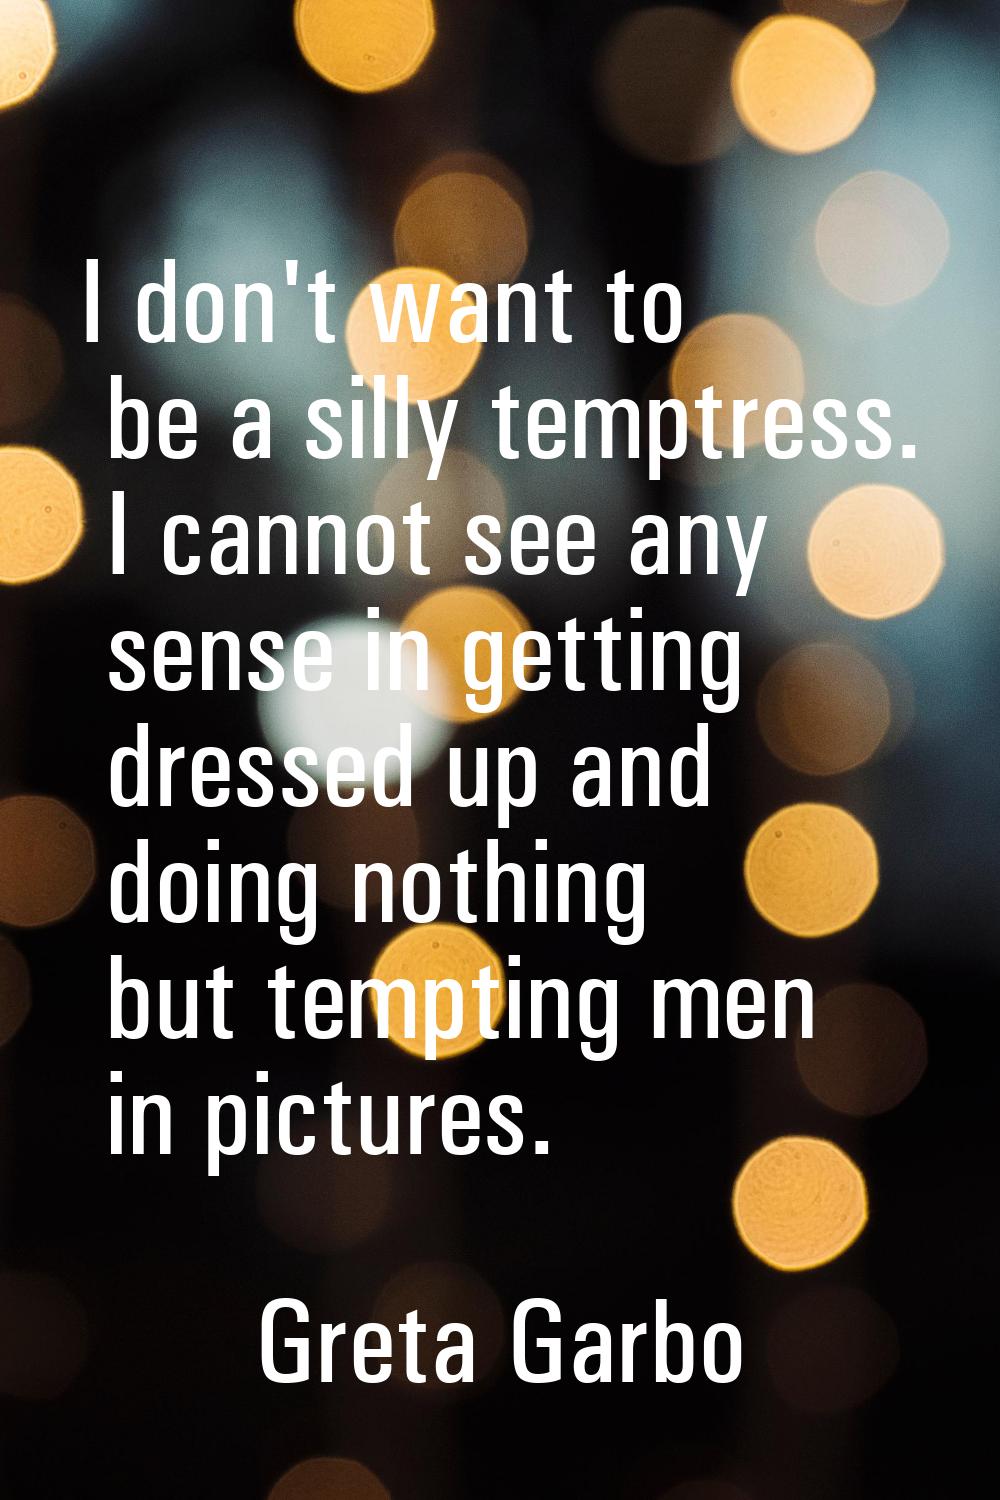 I don't want to be a silly temptress. I cannot see any sense in getting dressed up and doing nothin